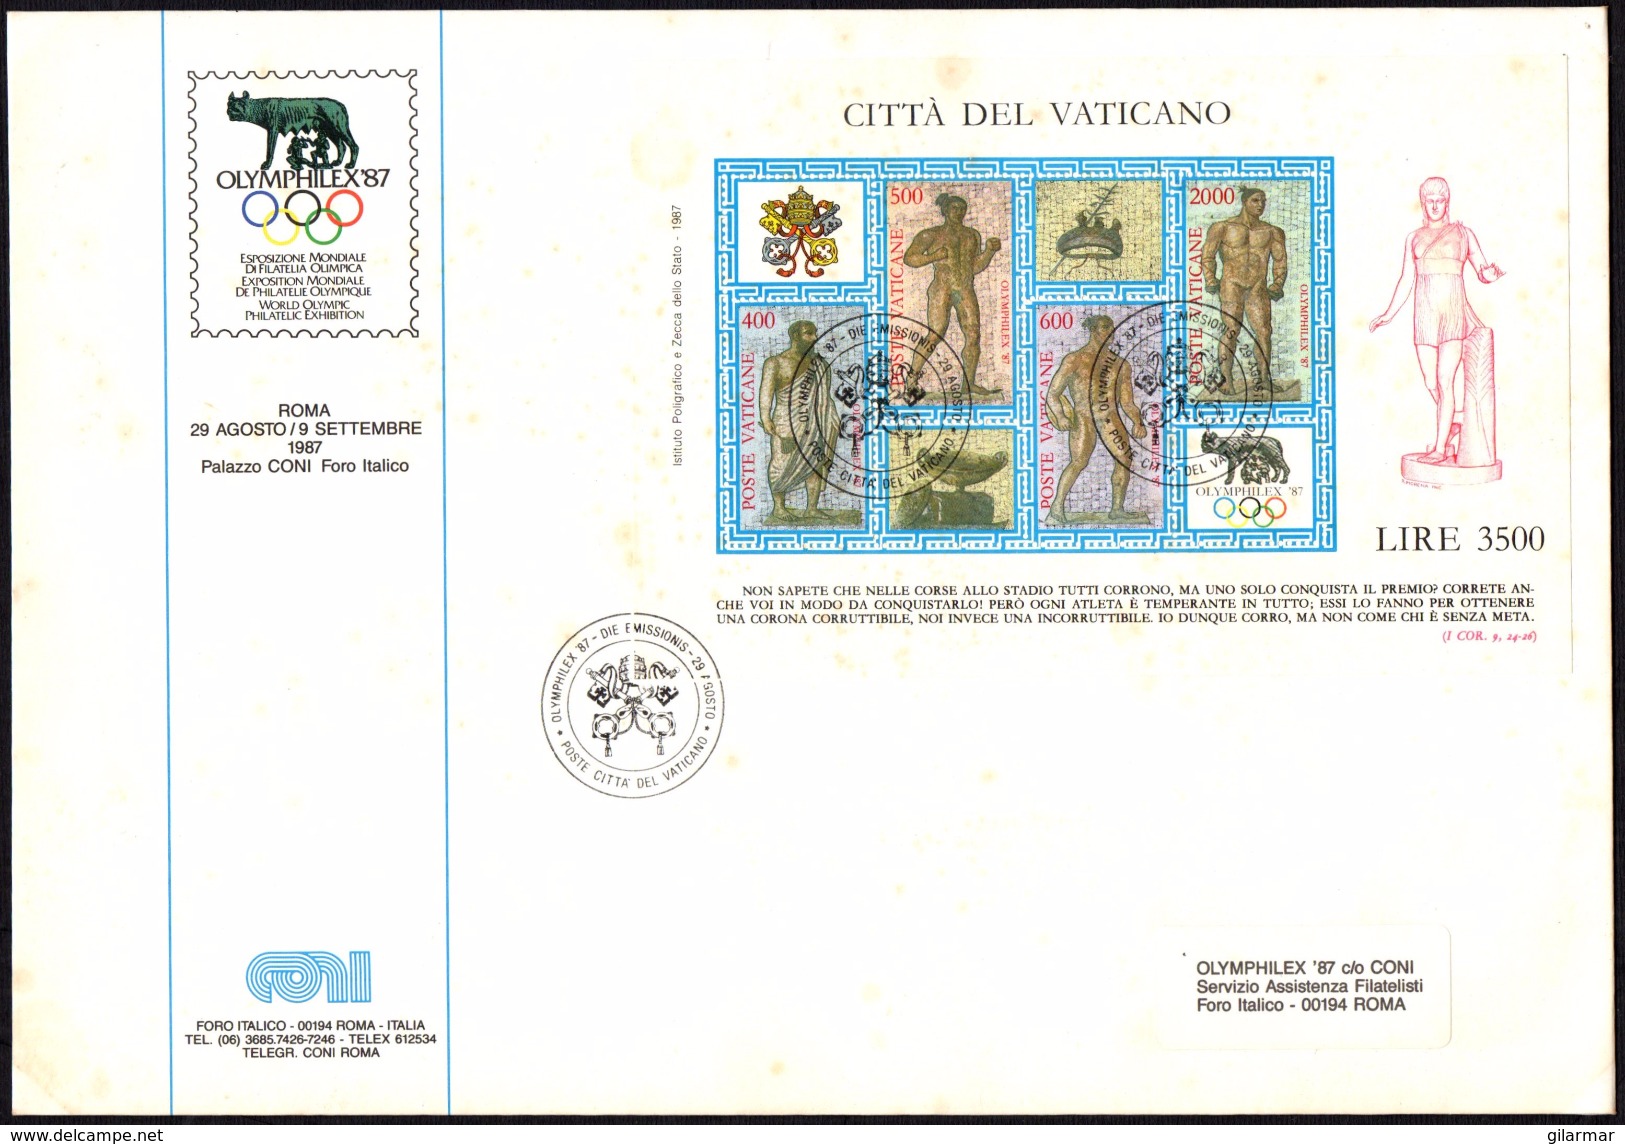 OLYMPIC GAMES -  VATICAN CITY 1987 - WORLD OLYMPIC PHILATELIC EXHIBITION - OLYMPHILEX ´87 - FDC - Sommer 1988: Seoul